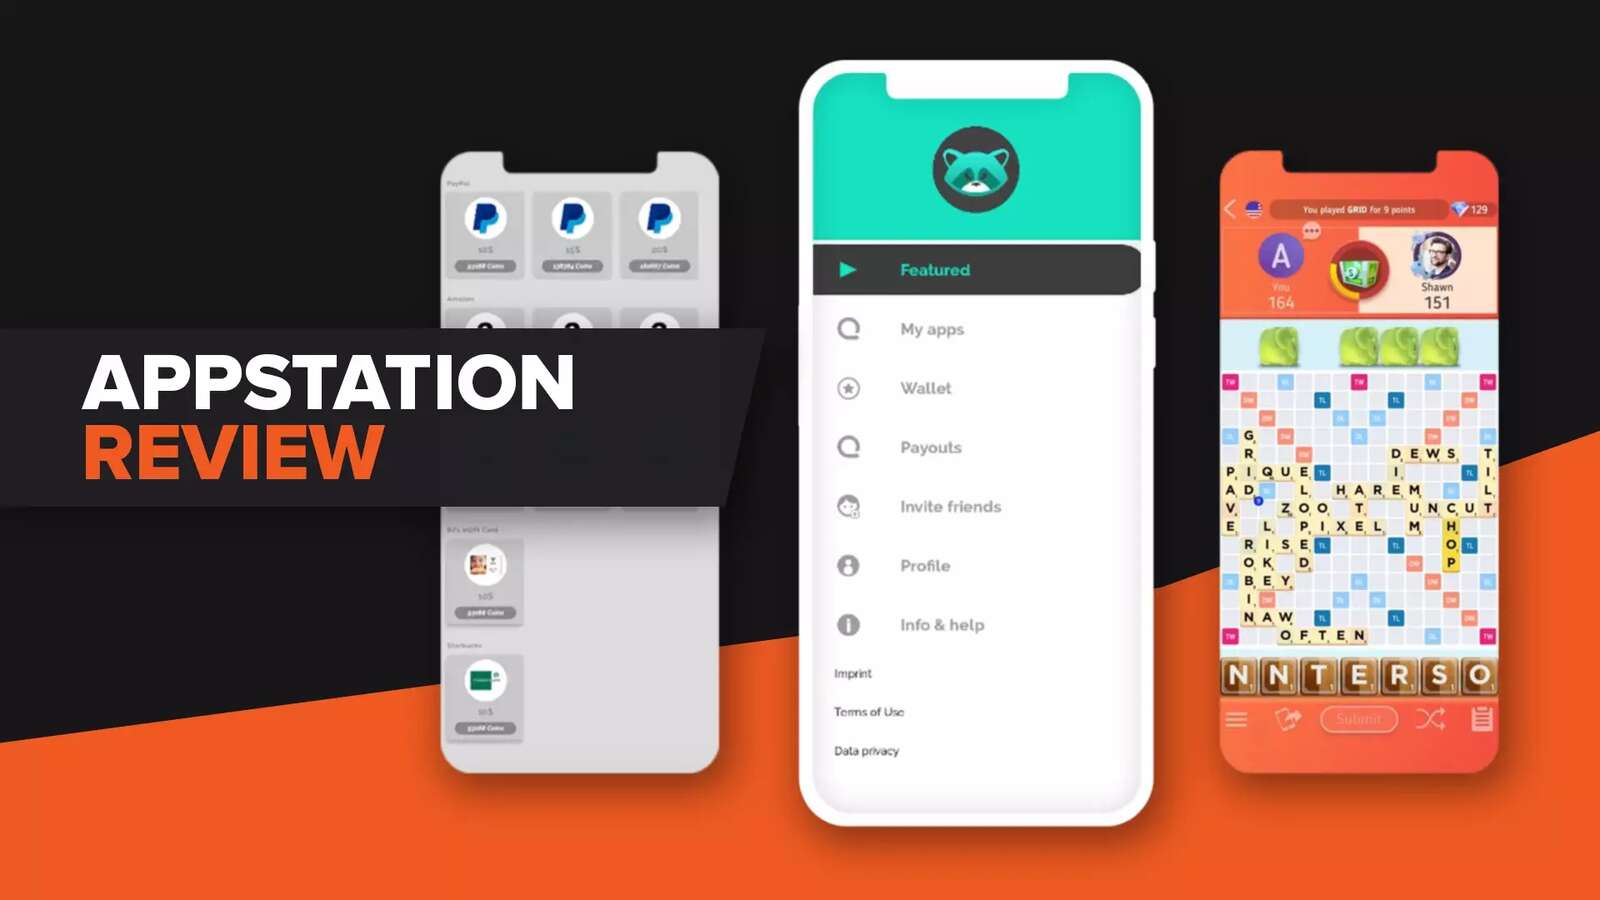 Is AppStation Legit? [Full AppStation Review]